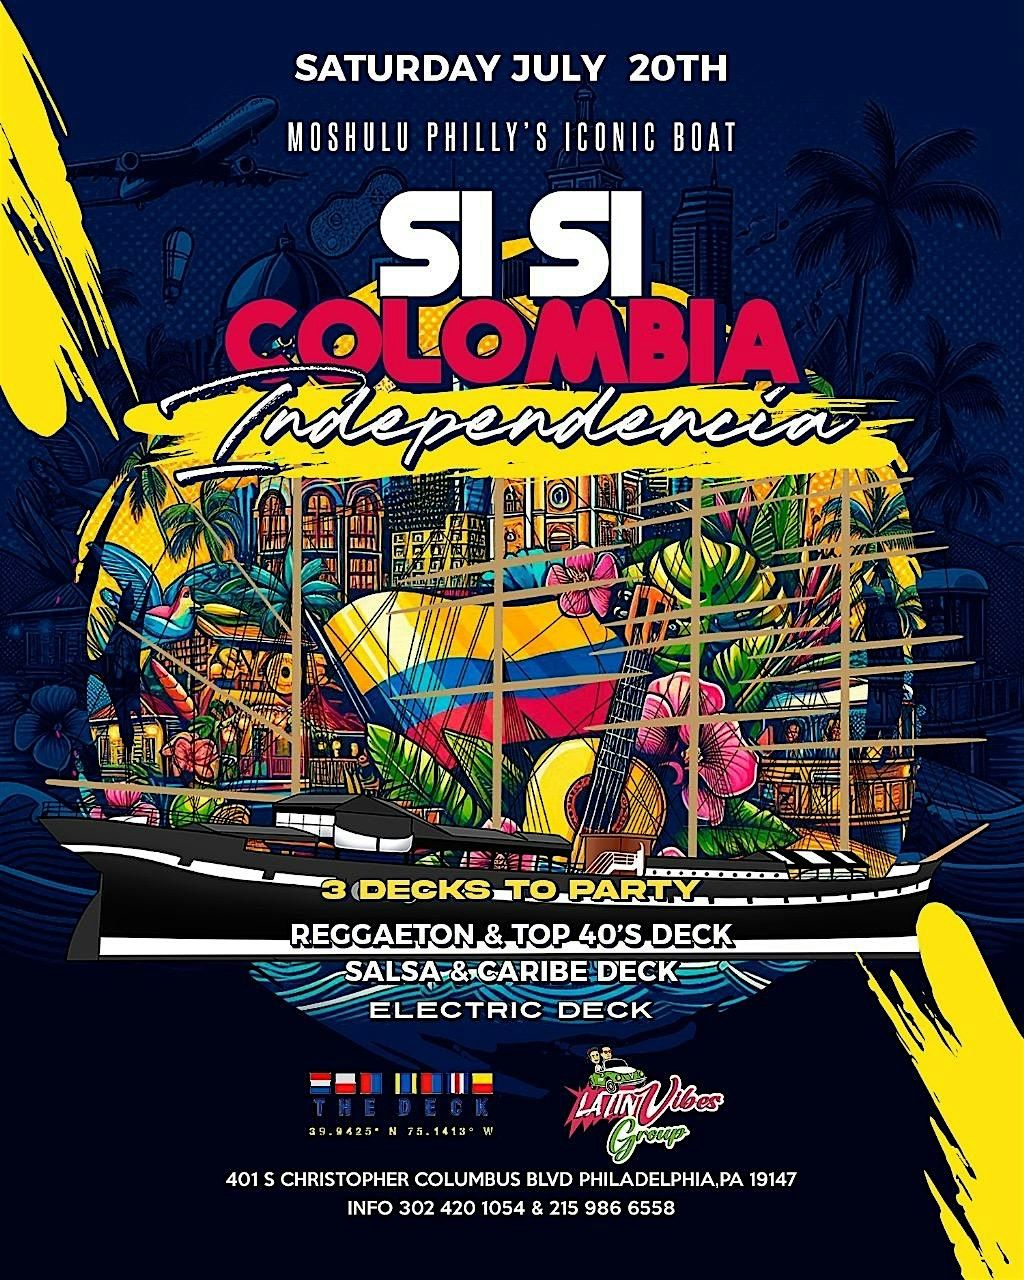 SI SI SI COLOMBIA #LATINBOATPARTY